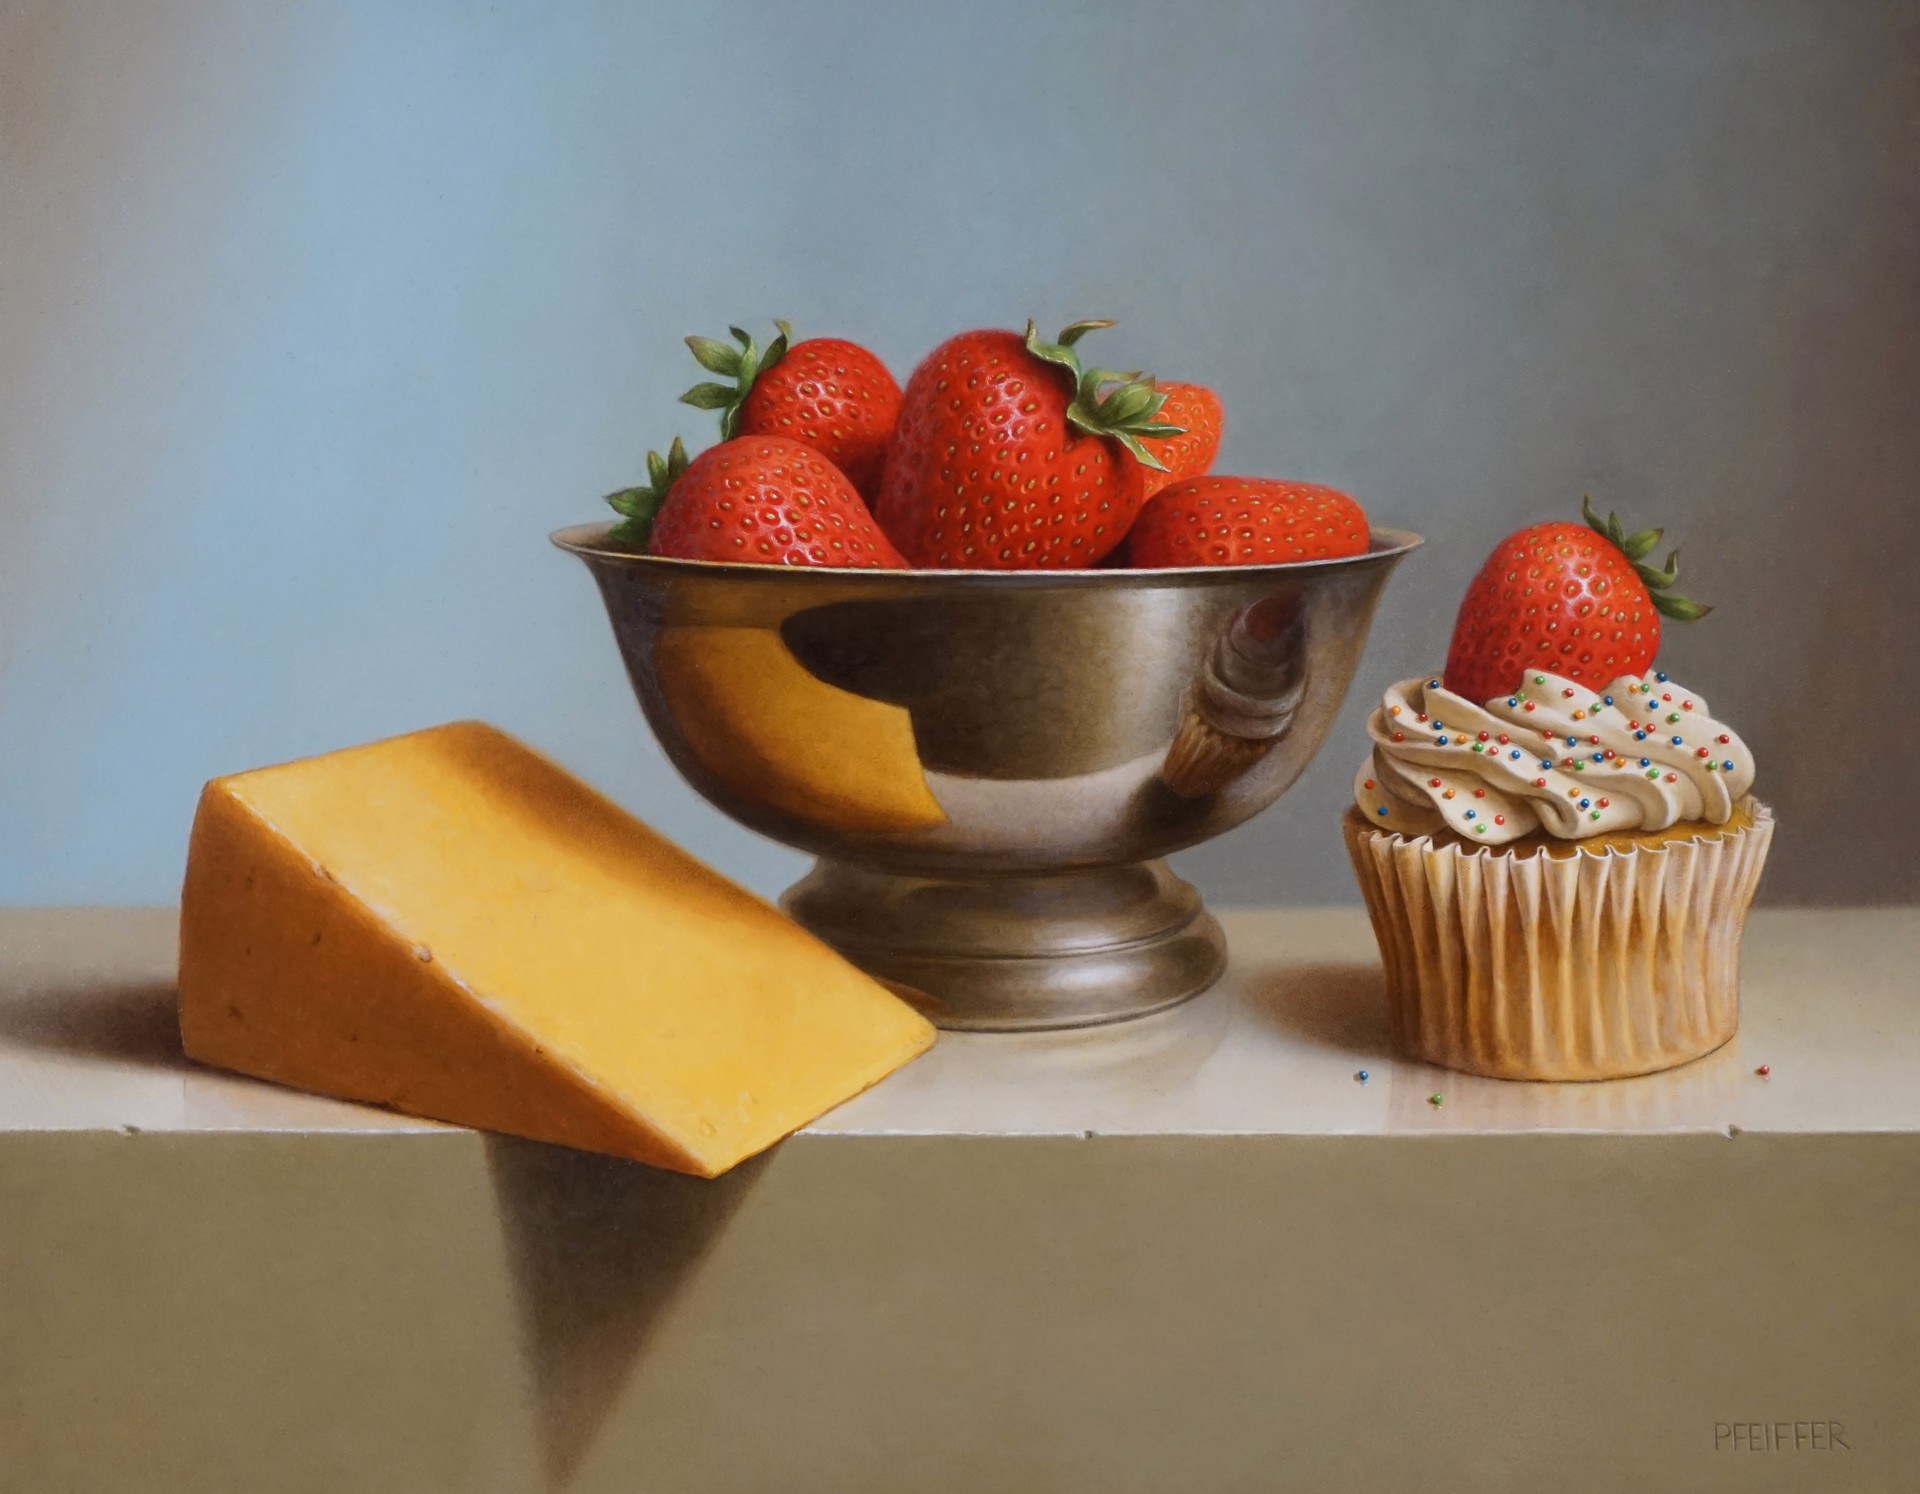 Strawberry Cheesecake by Jacob A. Pfeiffer